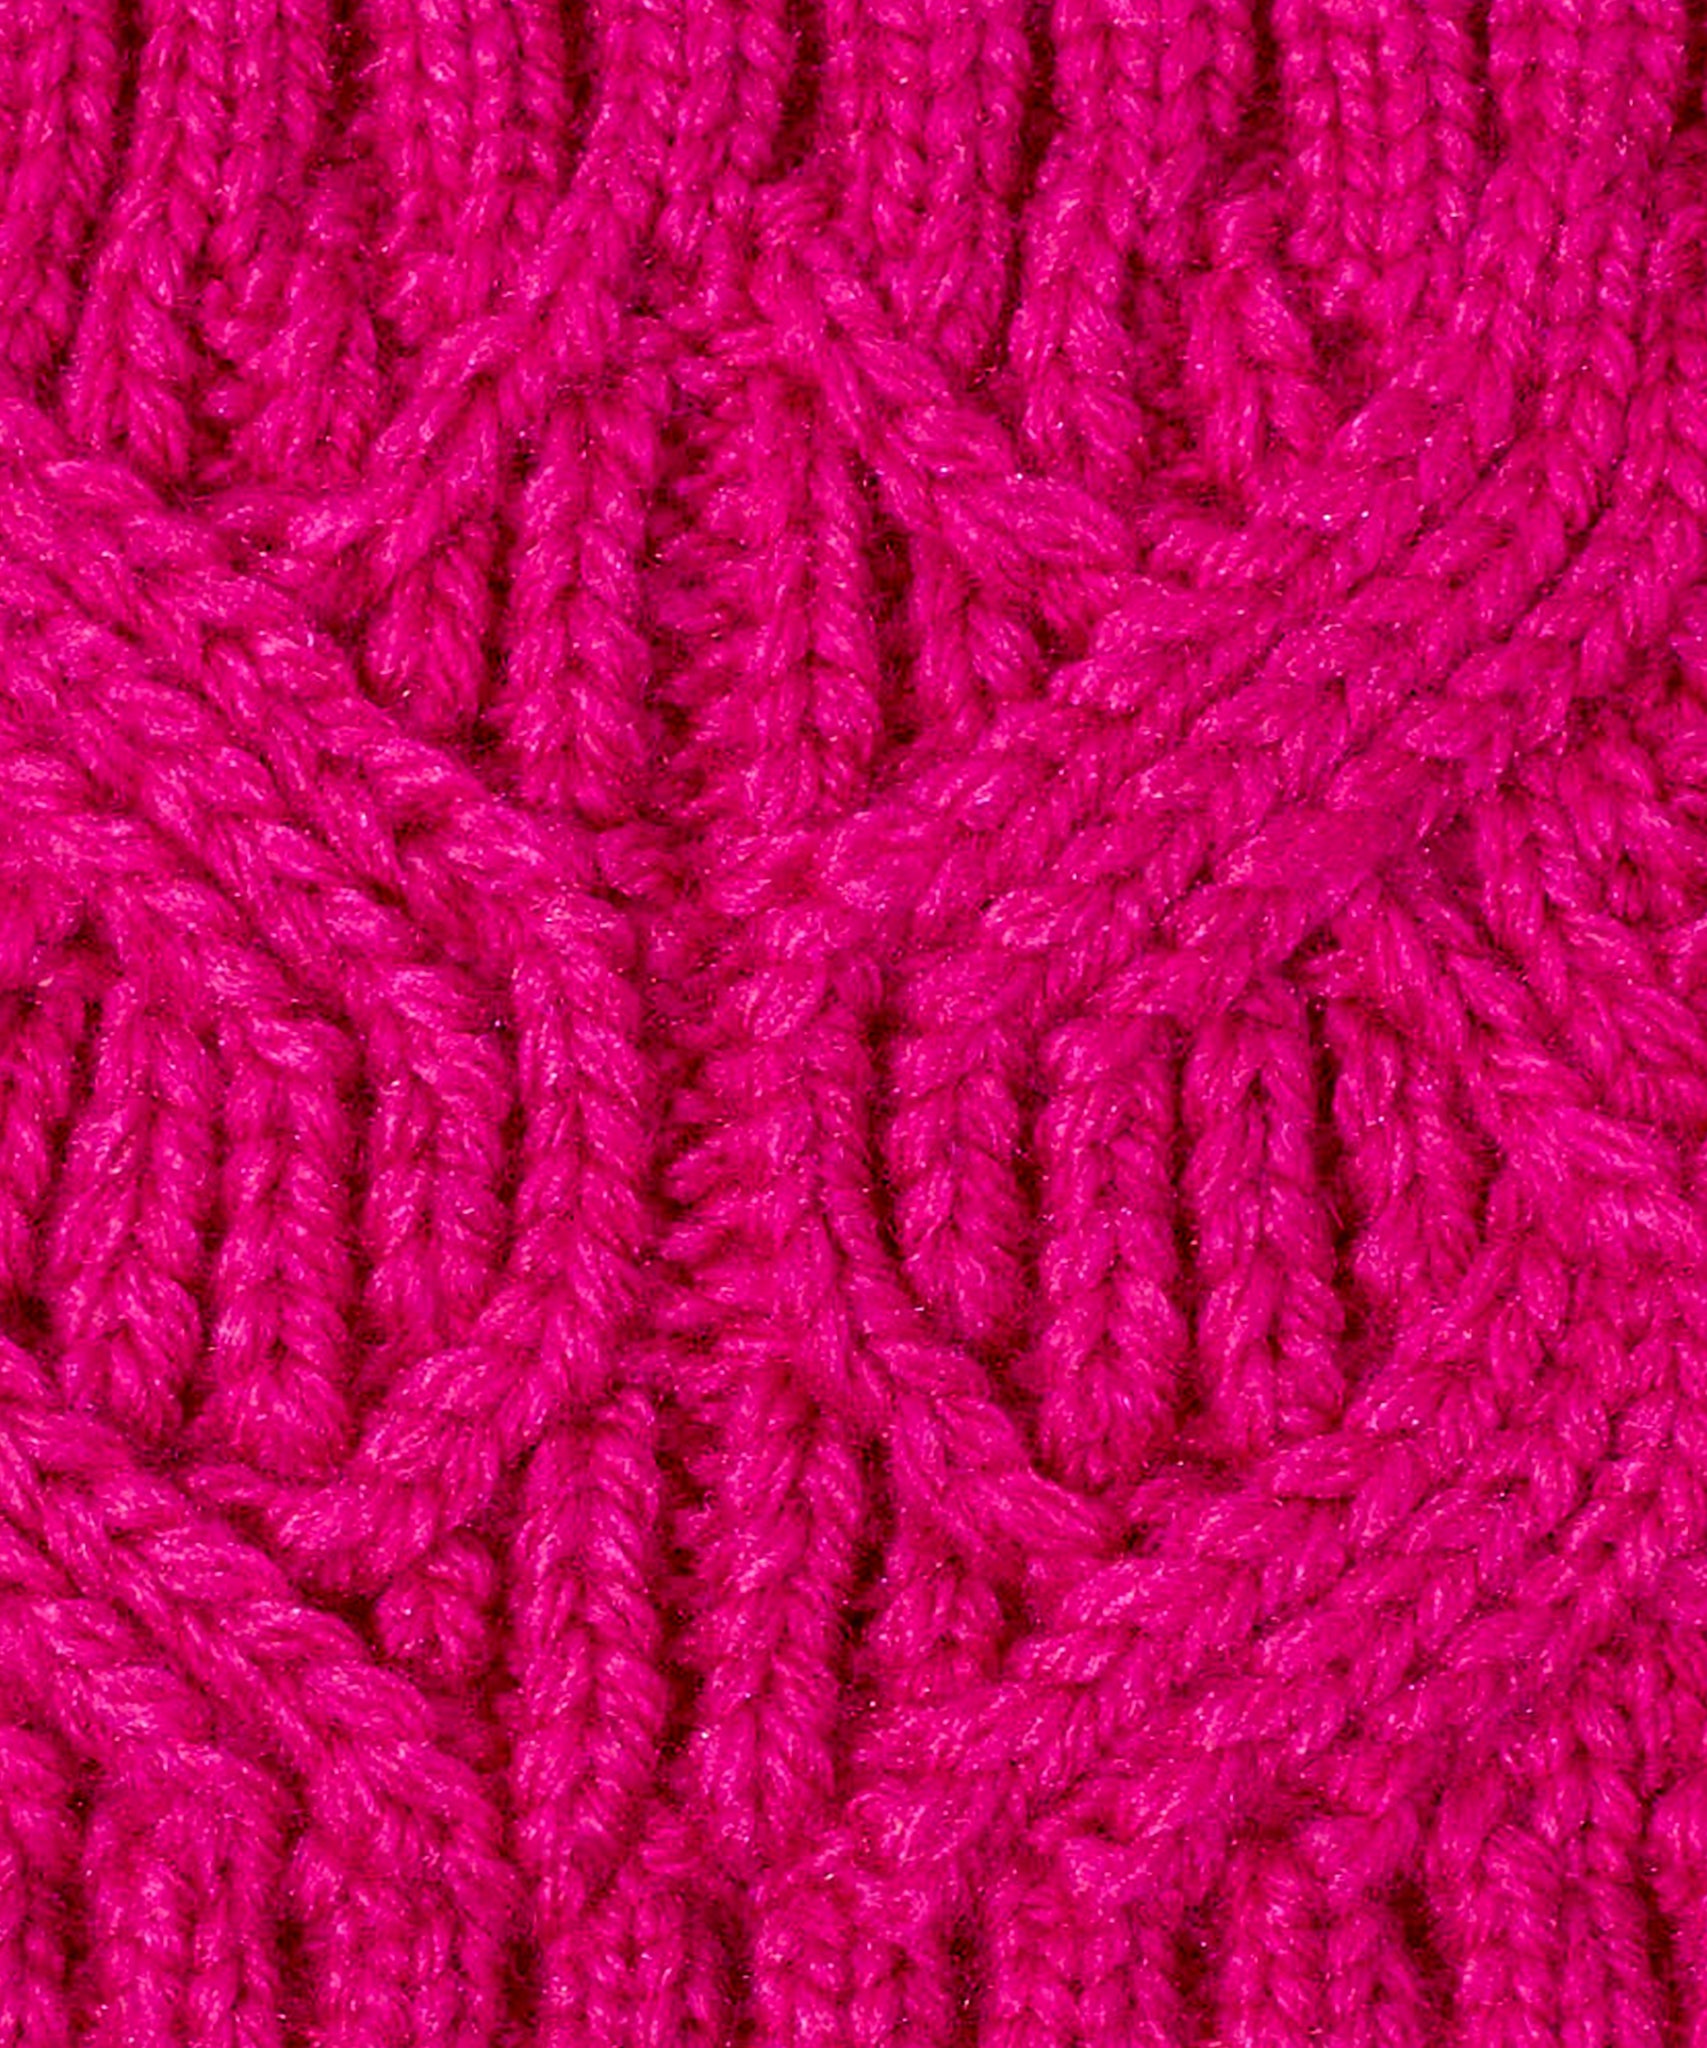 Loopy Cable Headband in color Electric Pink